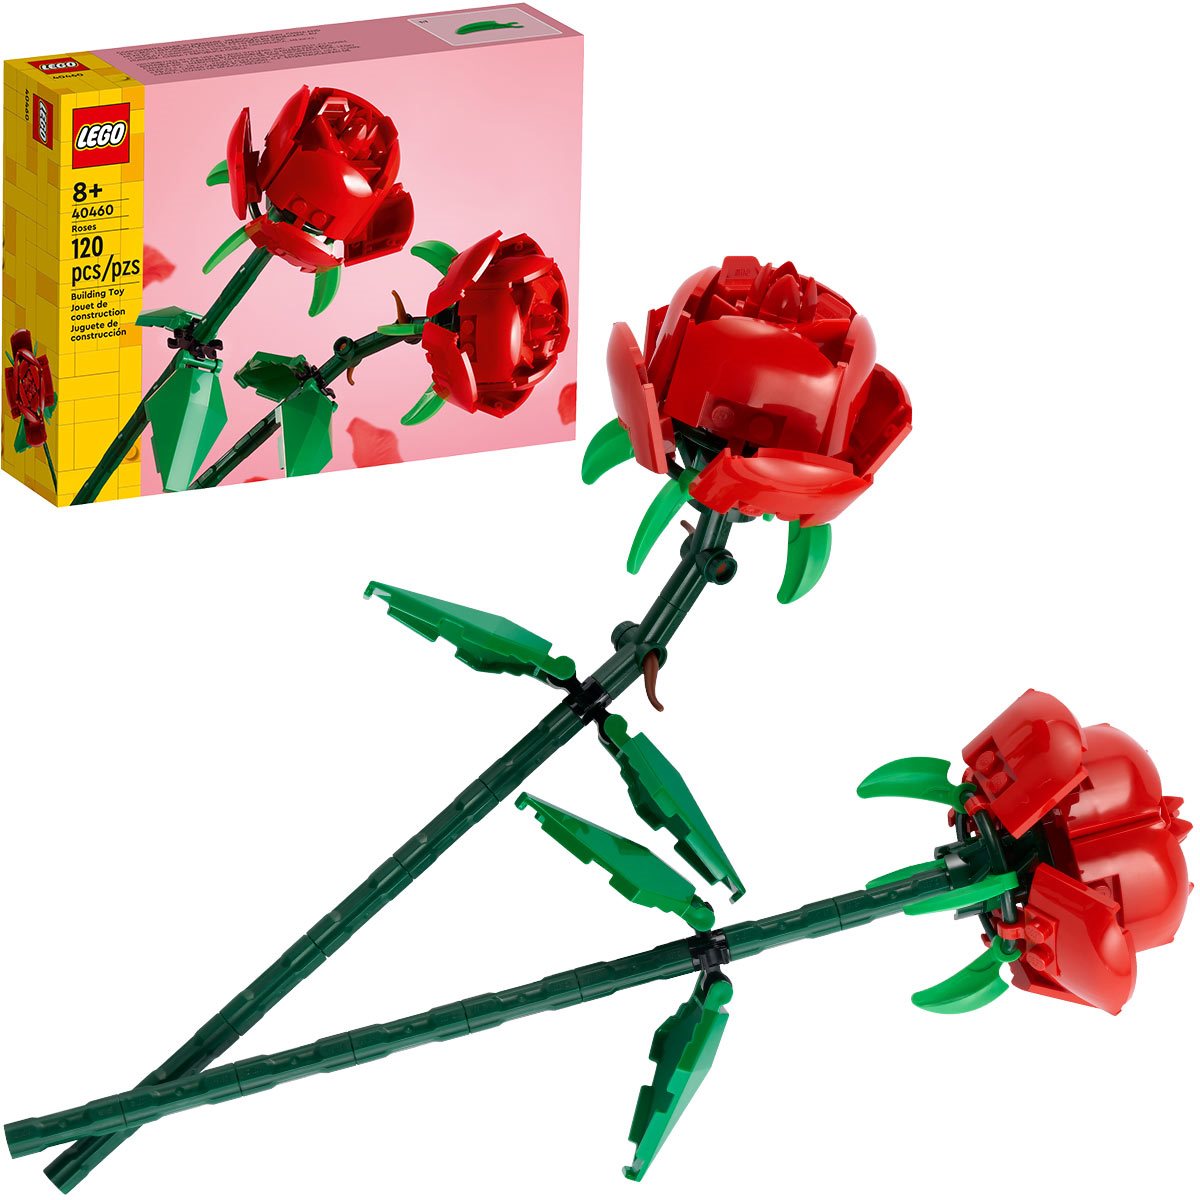 LEGO Iconic 40460 Roses Building Kit (120 Pieces)